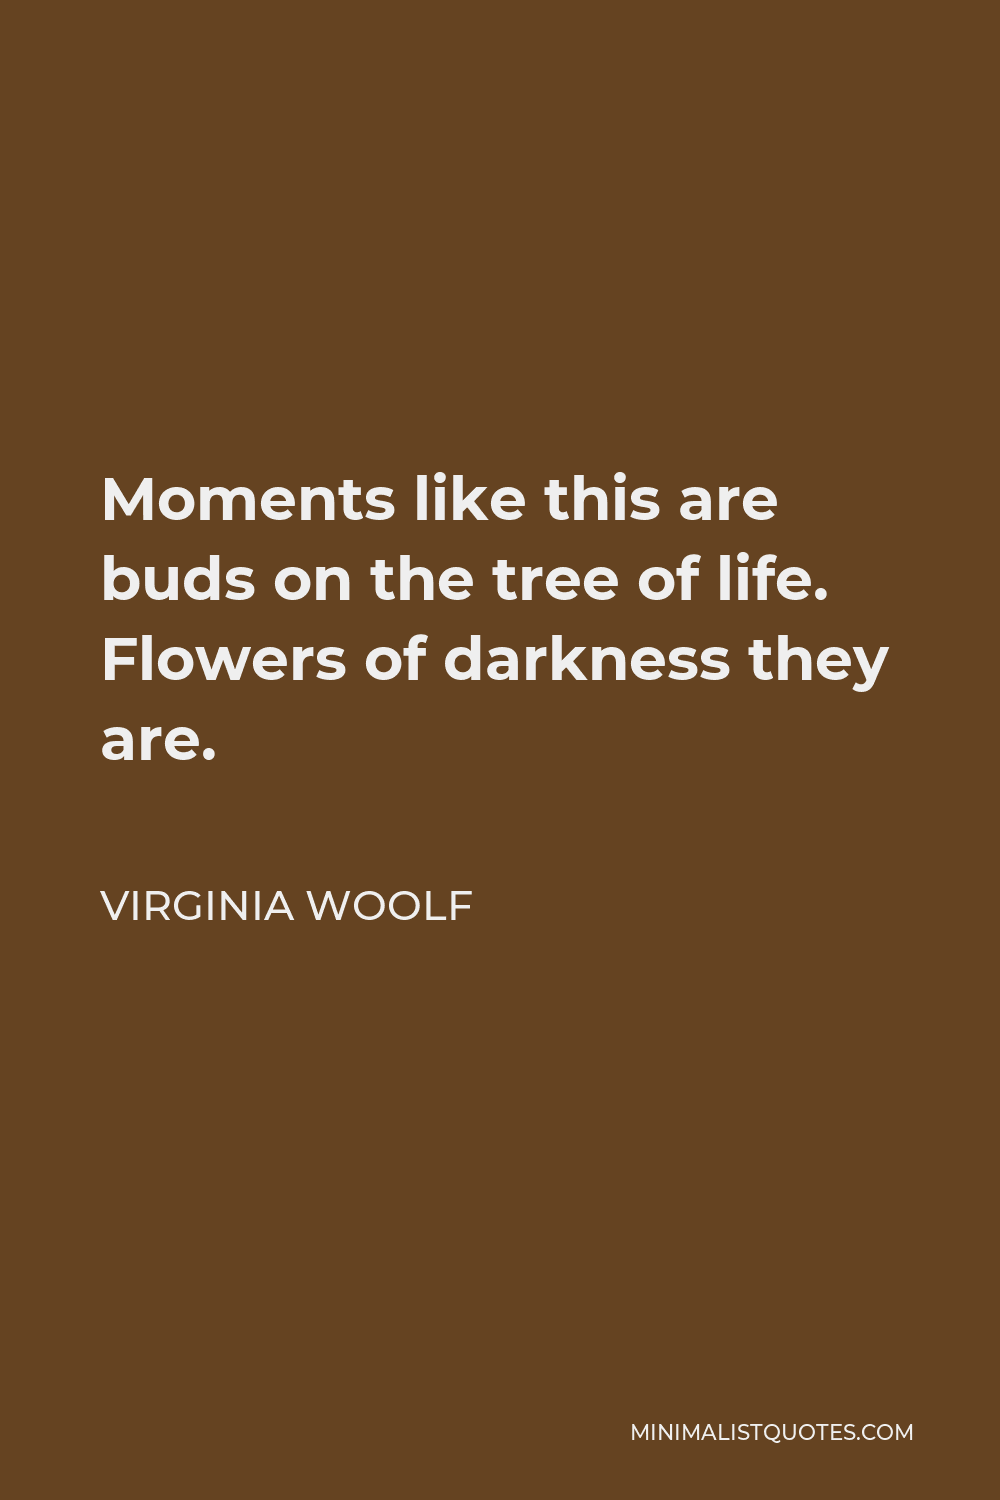 Virginia Woolf Quote - Moments like this are buds on the tree of life. Flowers of darkness they are.